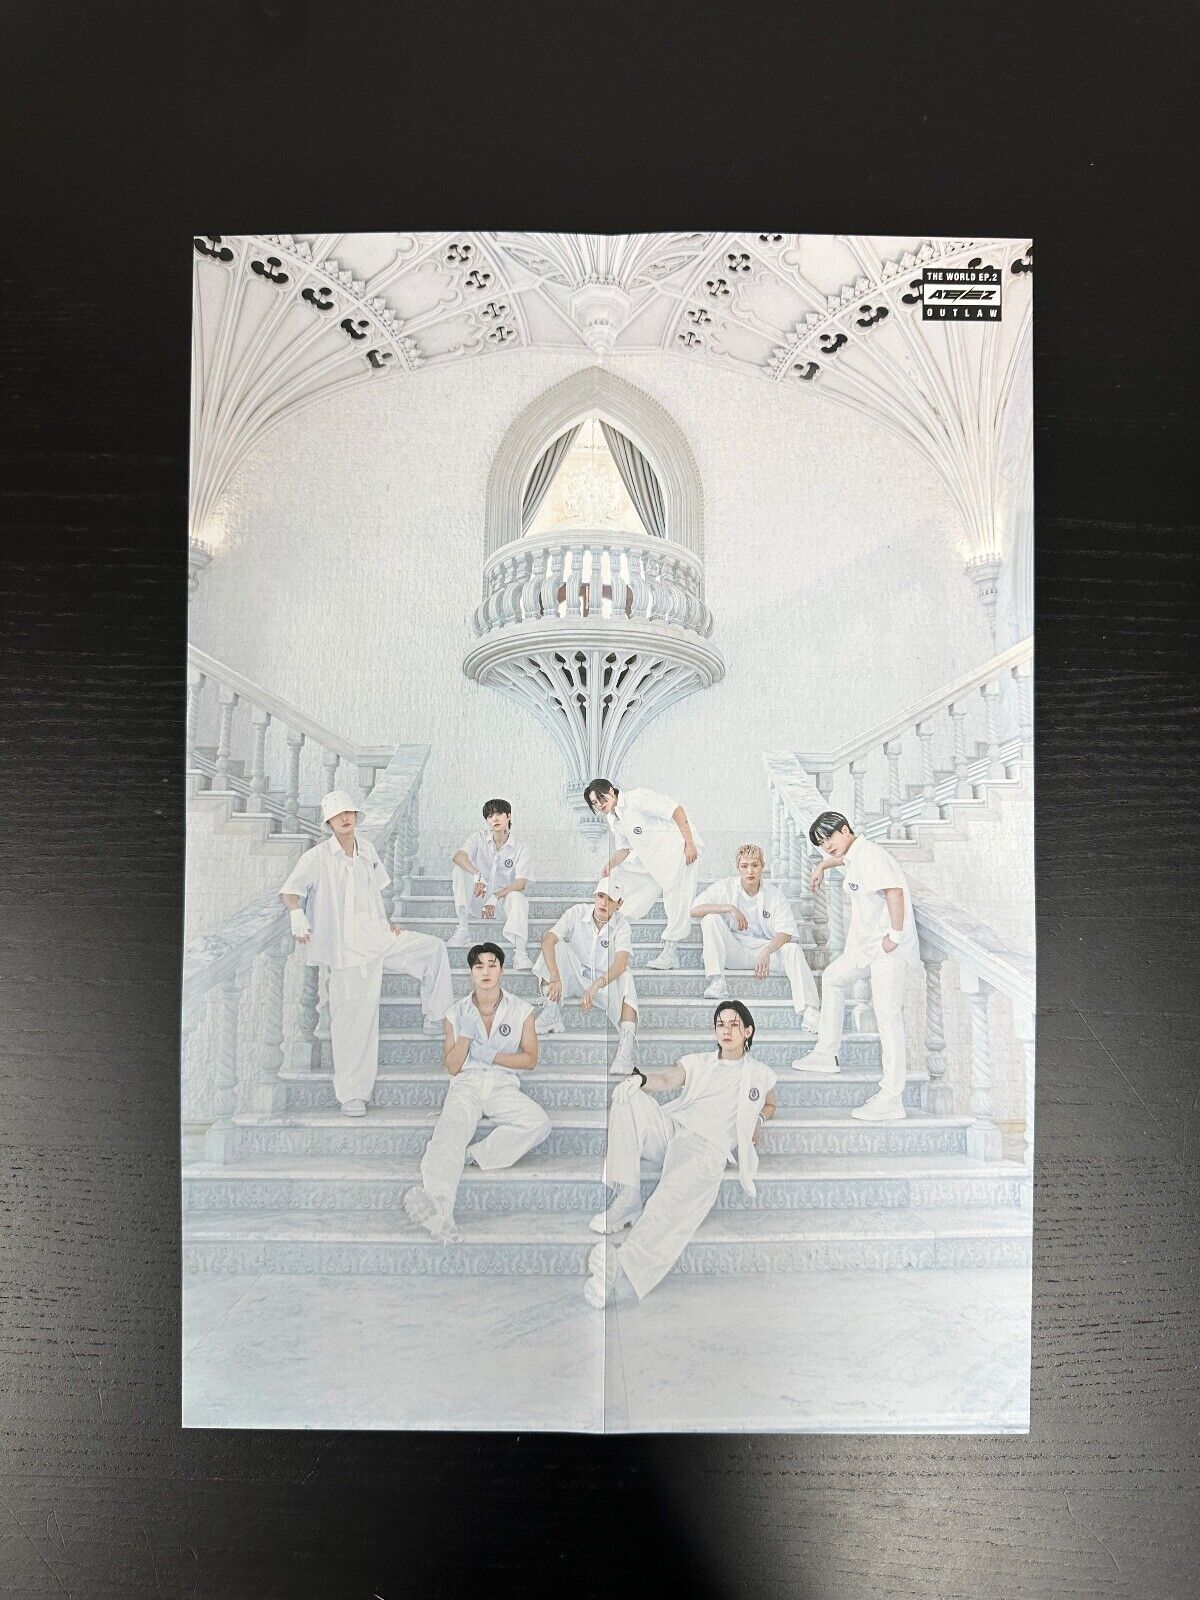 ATEEZ - The World EP.2: Outlaw (Platform Ver.)  Limited Folded Poster